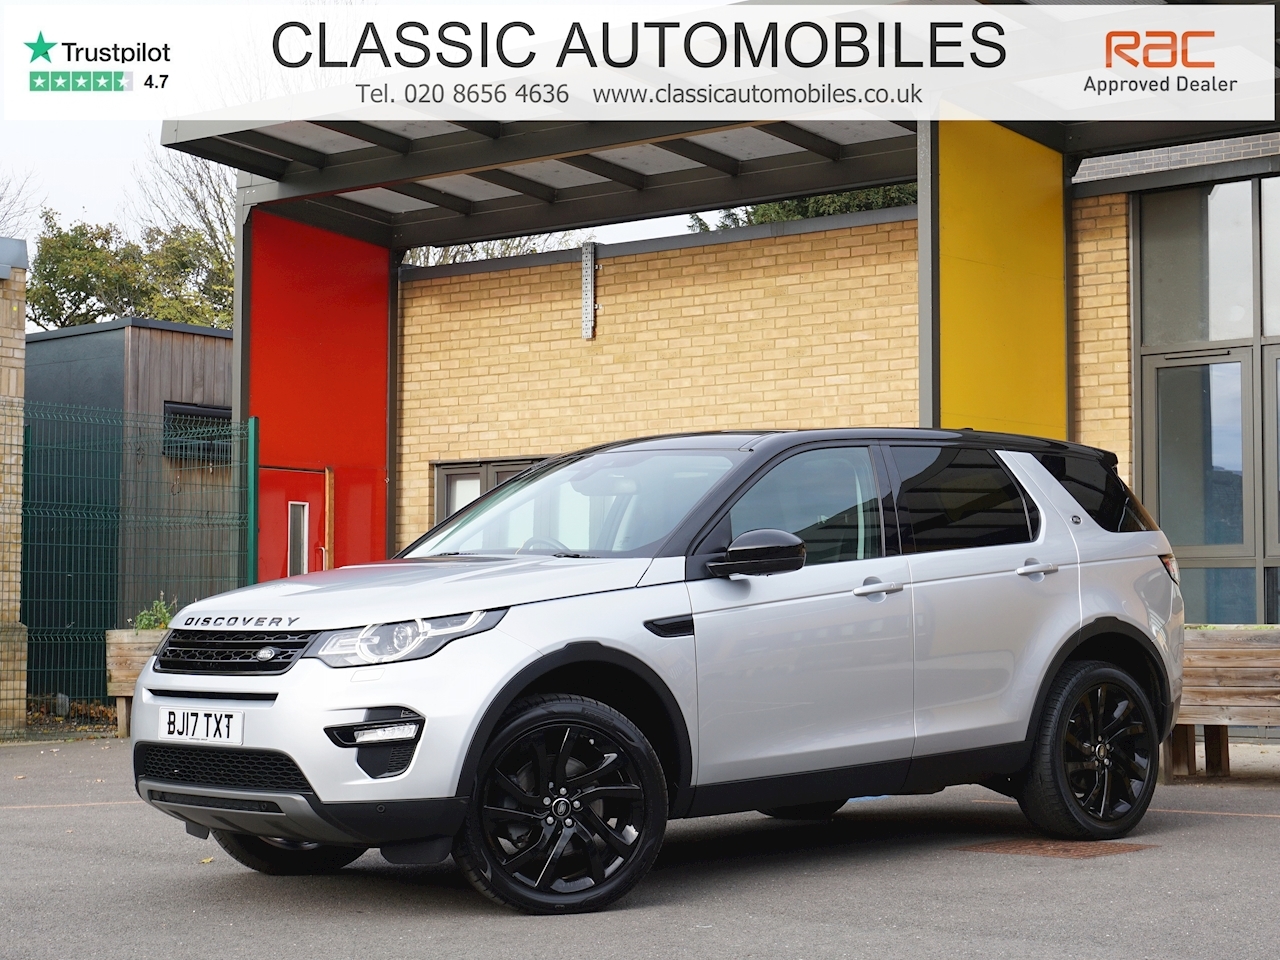 Discovery Sport 2.0 TD4 HSE Black SUV 5dr Diesel Auto 4WD (s/s) (180 ps)